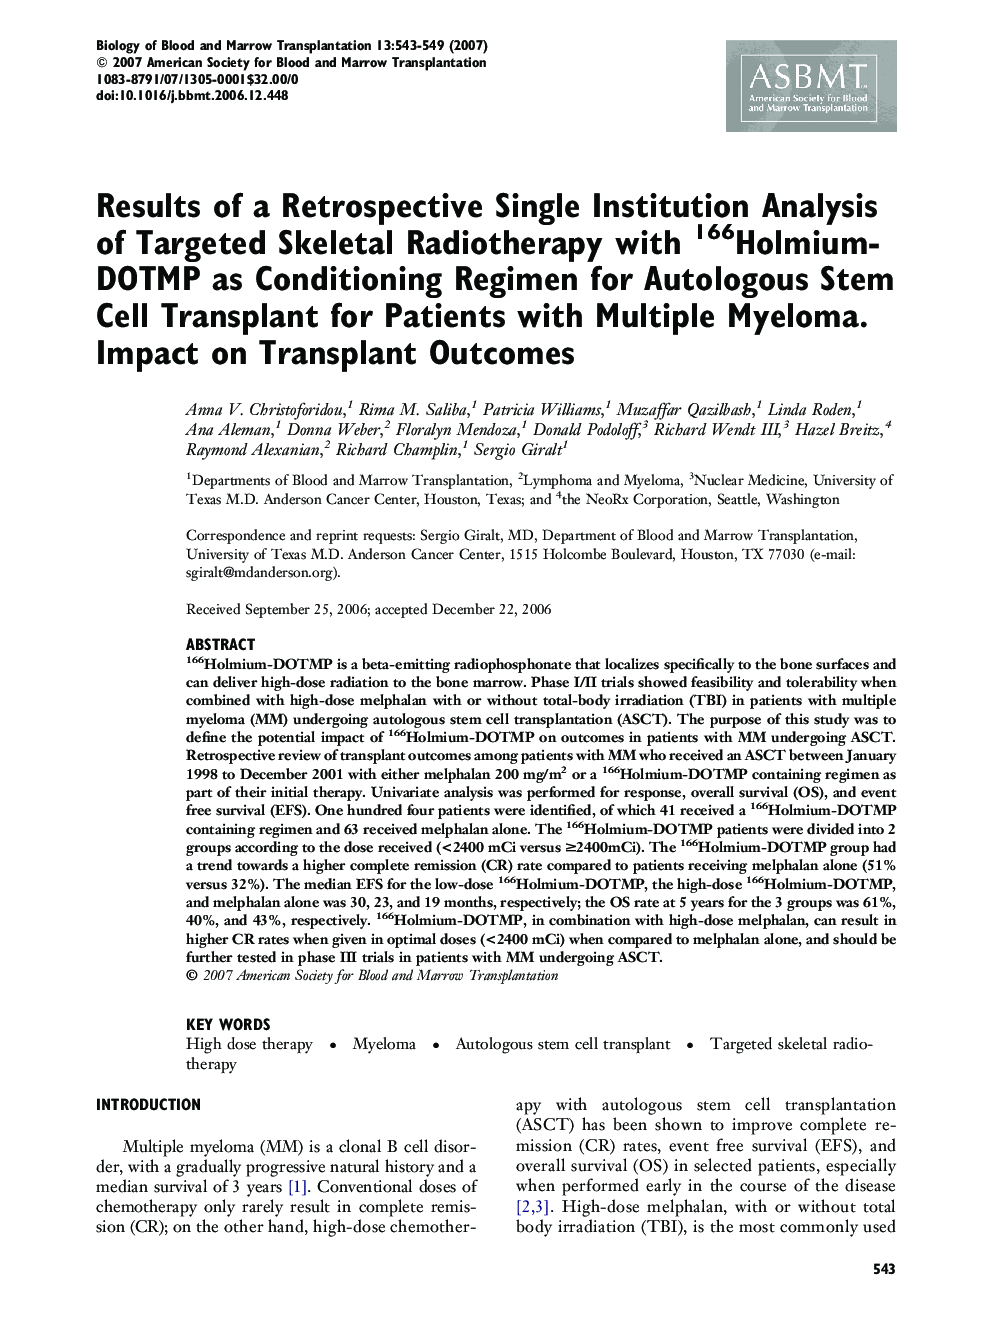 Results of a Retrospective Single Institution Analysis of Targeted Skeletal Radiotherapy with 166Holmium-DOTMP as Conditioning Regimen for Autologous Stem Cell Transplant for Patients with Multiple Myeloma. Impact on Transplant Outcomes